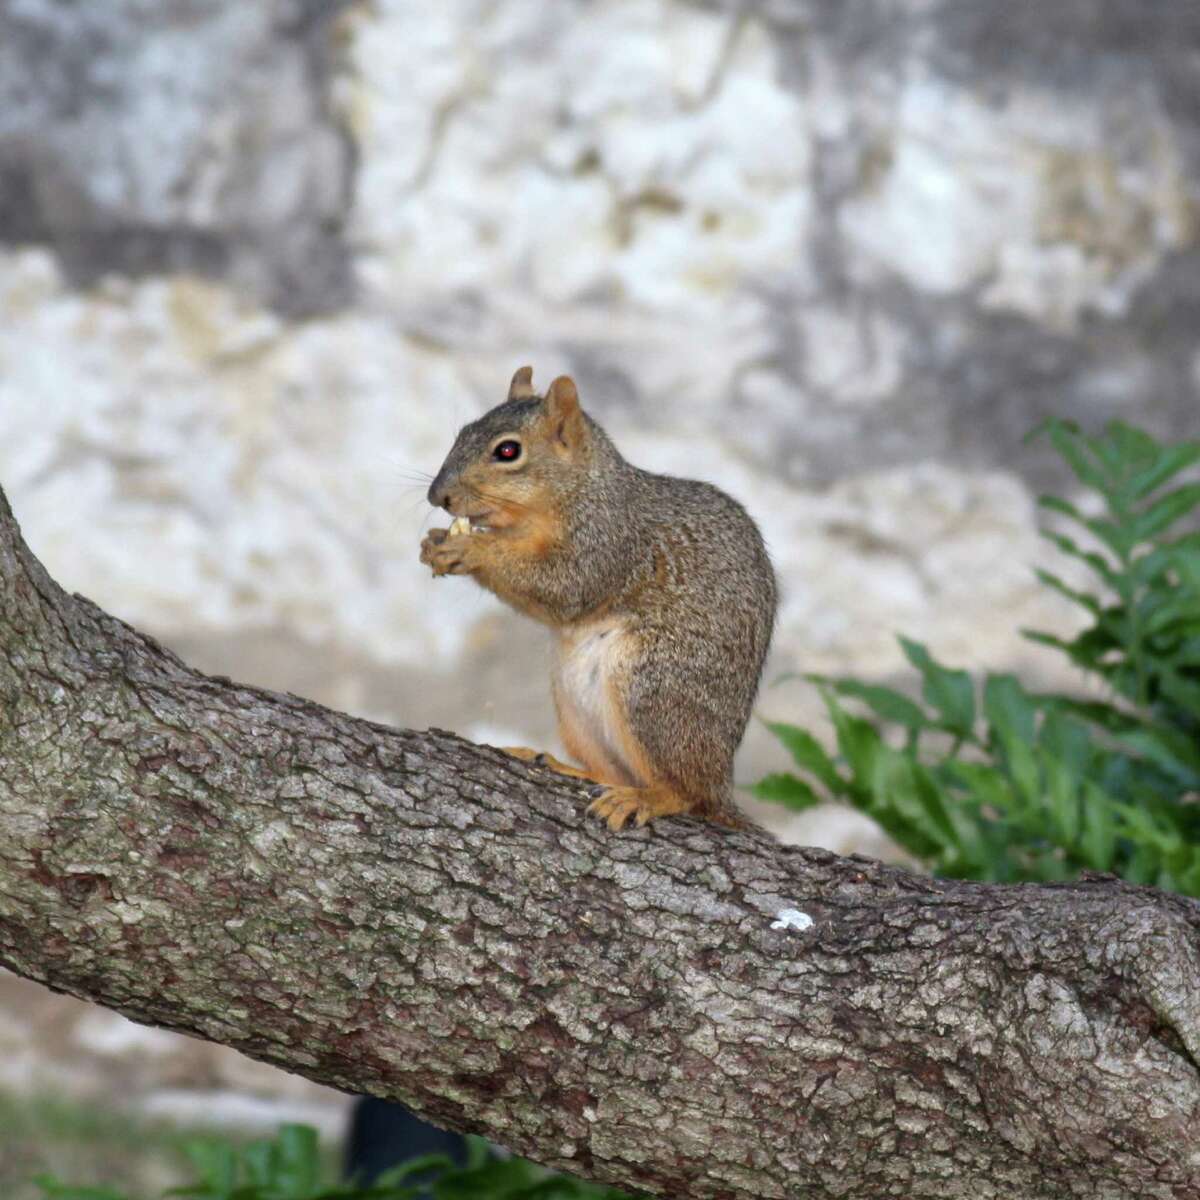 This squirrel was enjoying spring break in a tree just south of the Alamo on April 1, 2013.